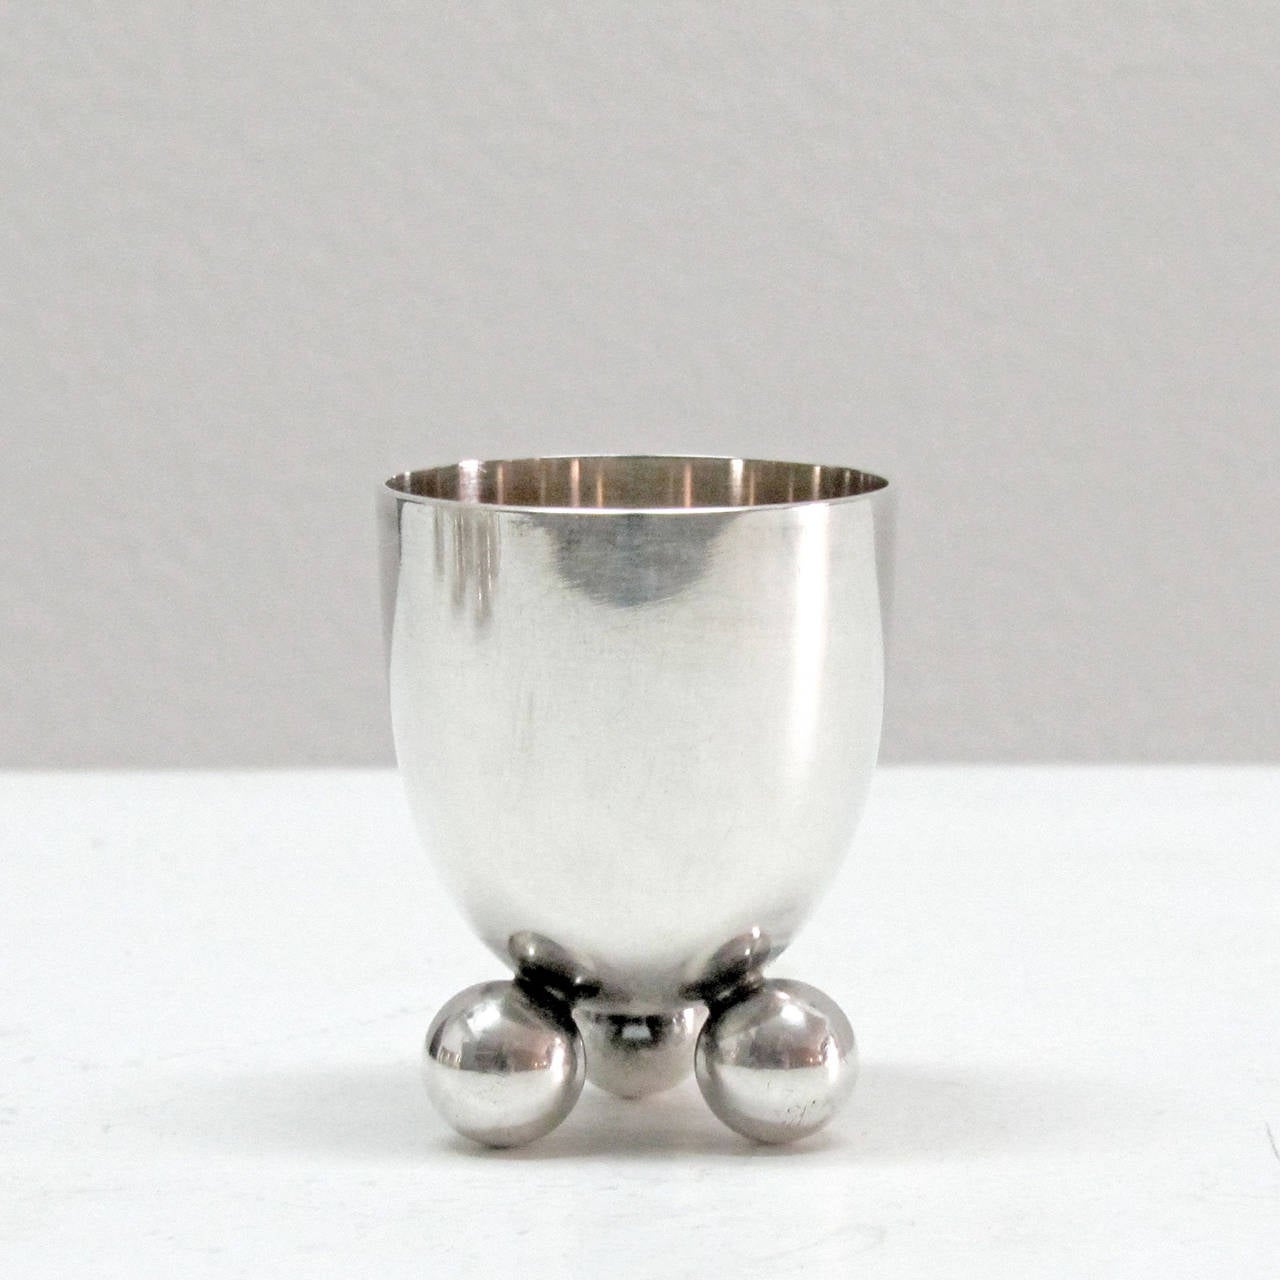 wonderful set of six silver egg holders No.8154, by F. A. Breuhaus De Groot for WMF, each cup sits on 3 small solid spheres